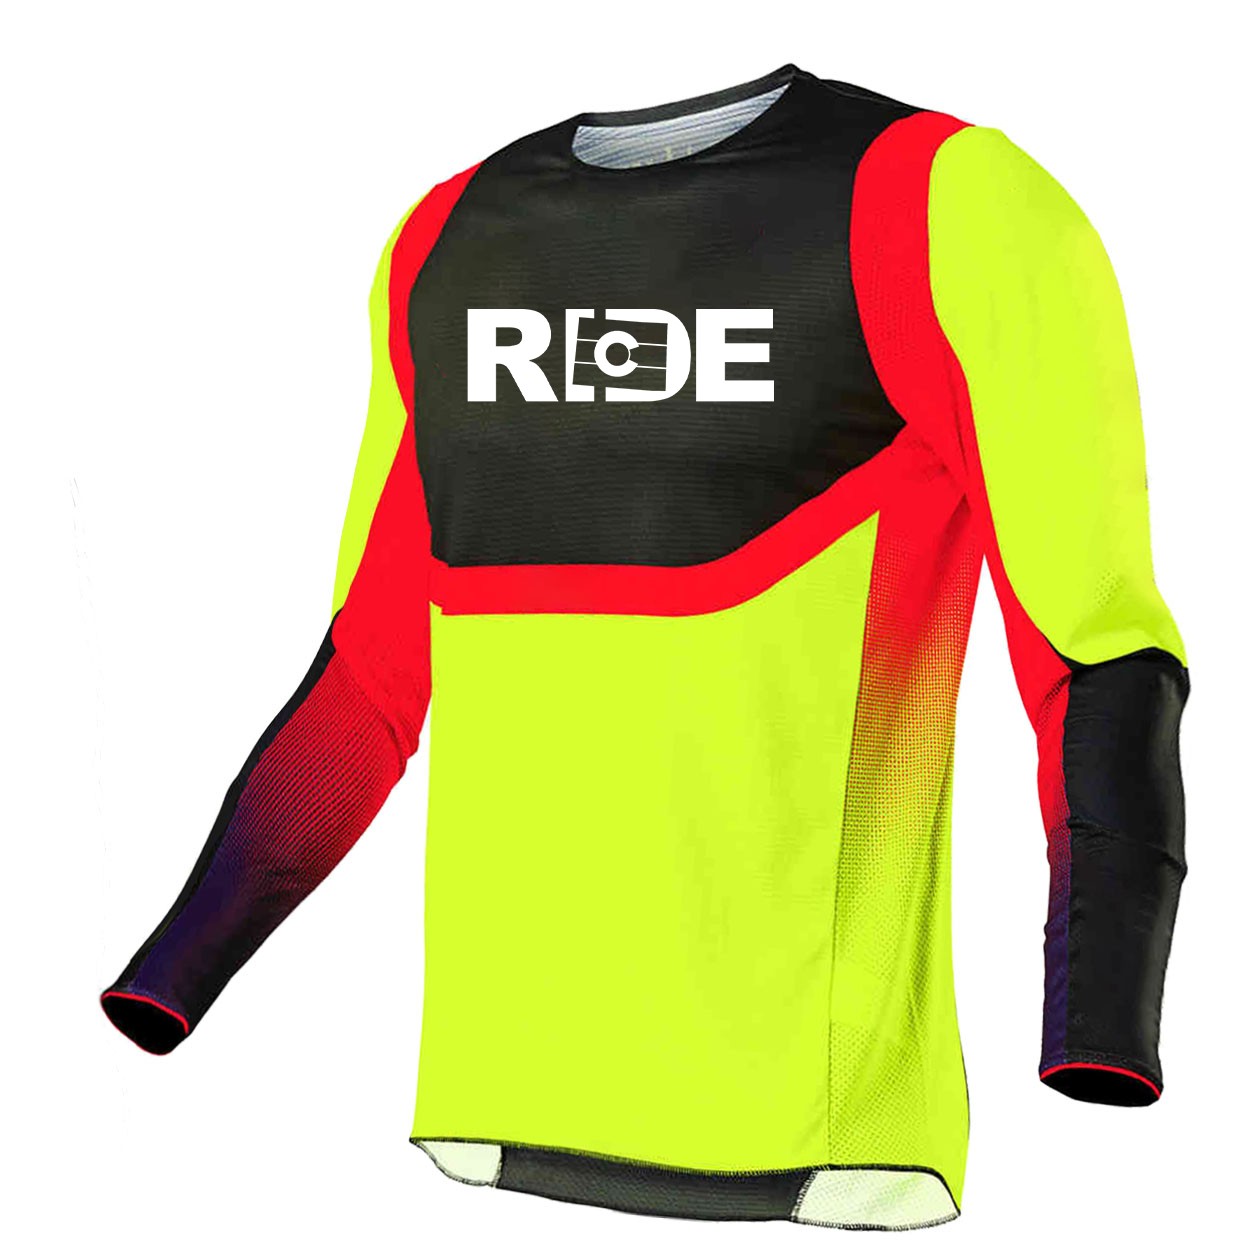 Ride Colorado Classic Performance Jersey Long Sleeve Shirt Black/Yellow/Red